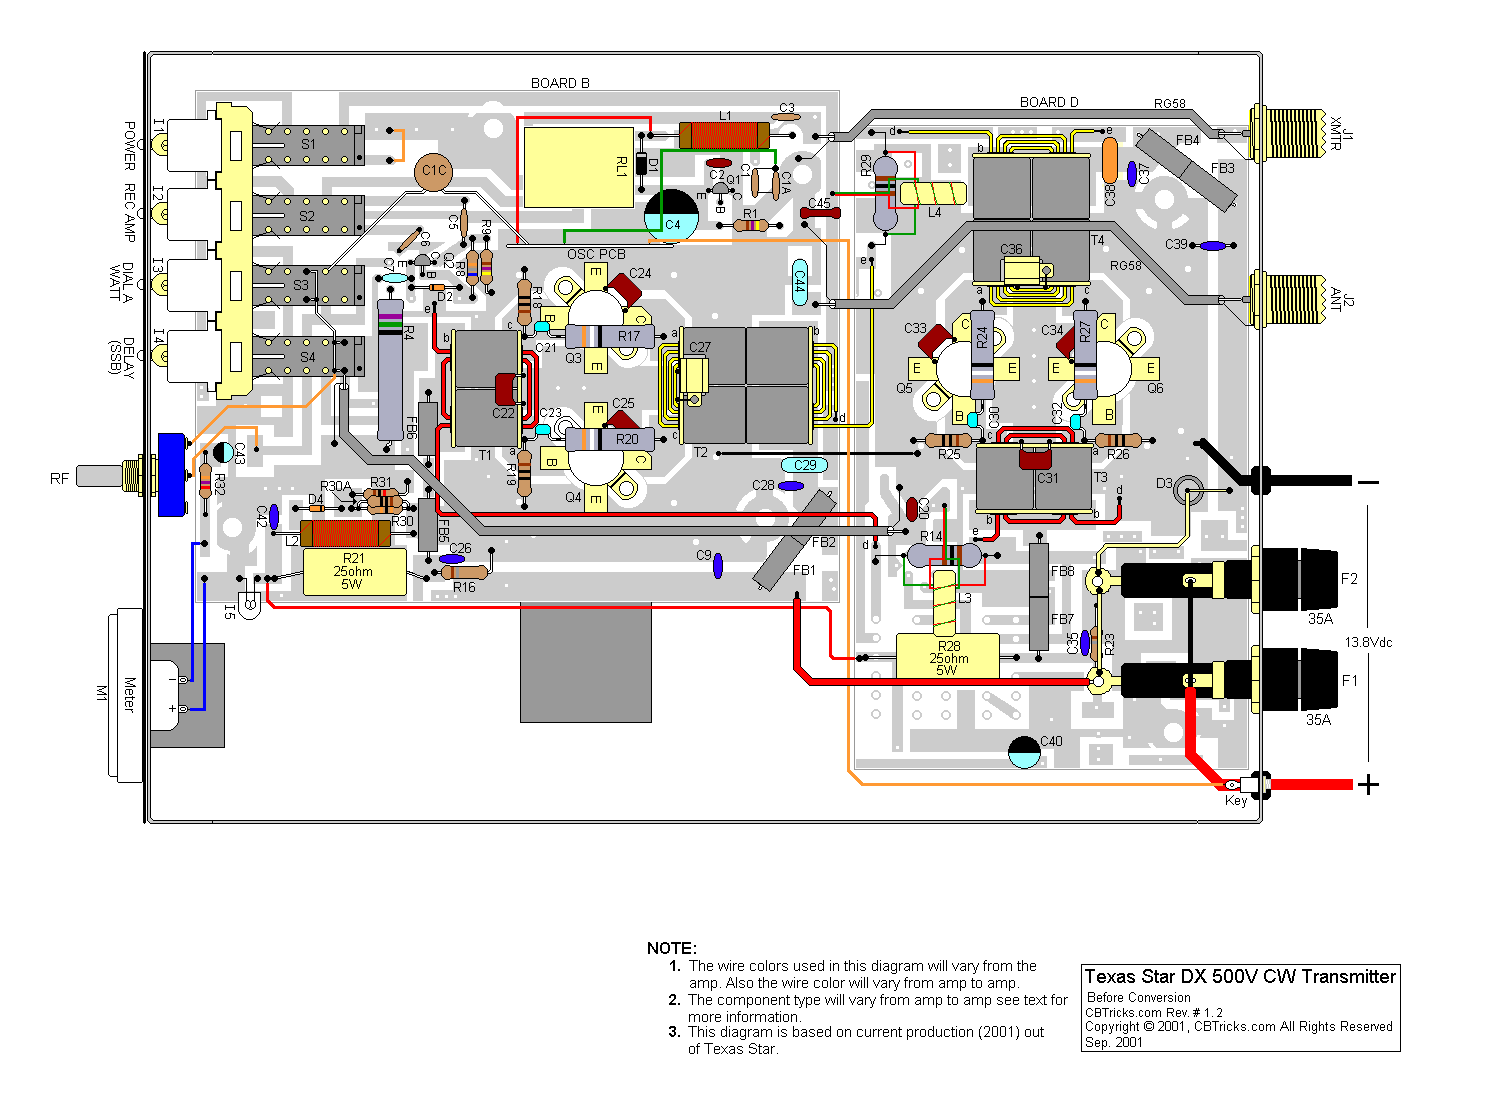 dx500v_cwtx_inter_connection_layout.gif